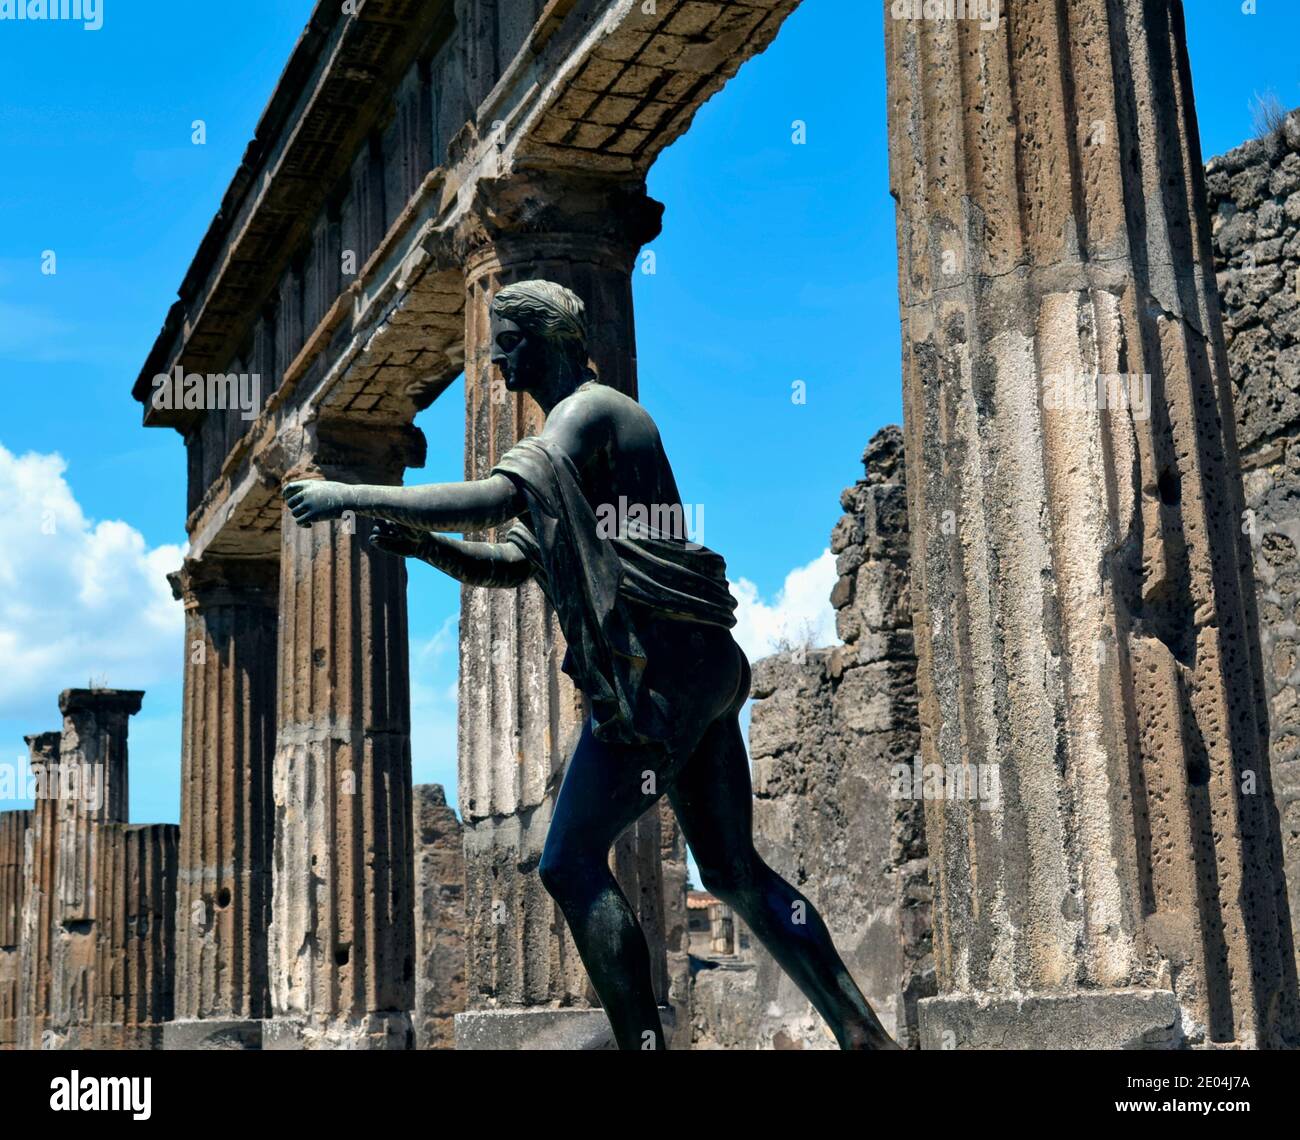 Statue and Ruins of Temple of Apollo in Pompeii Italy Stock Photo